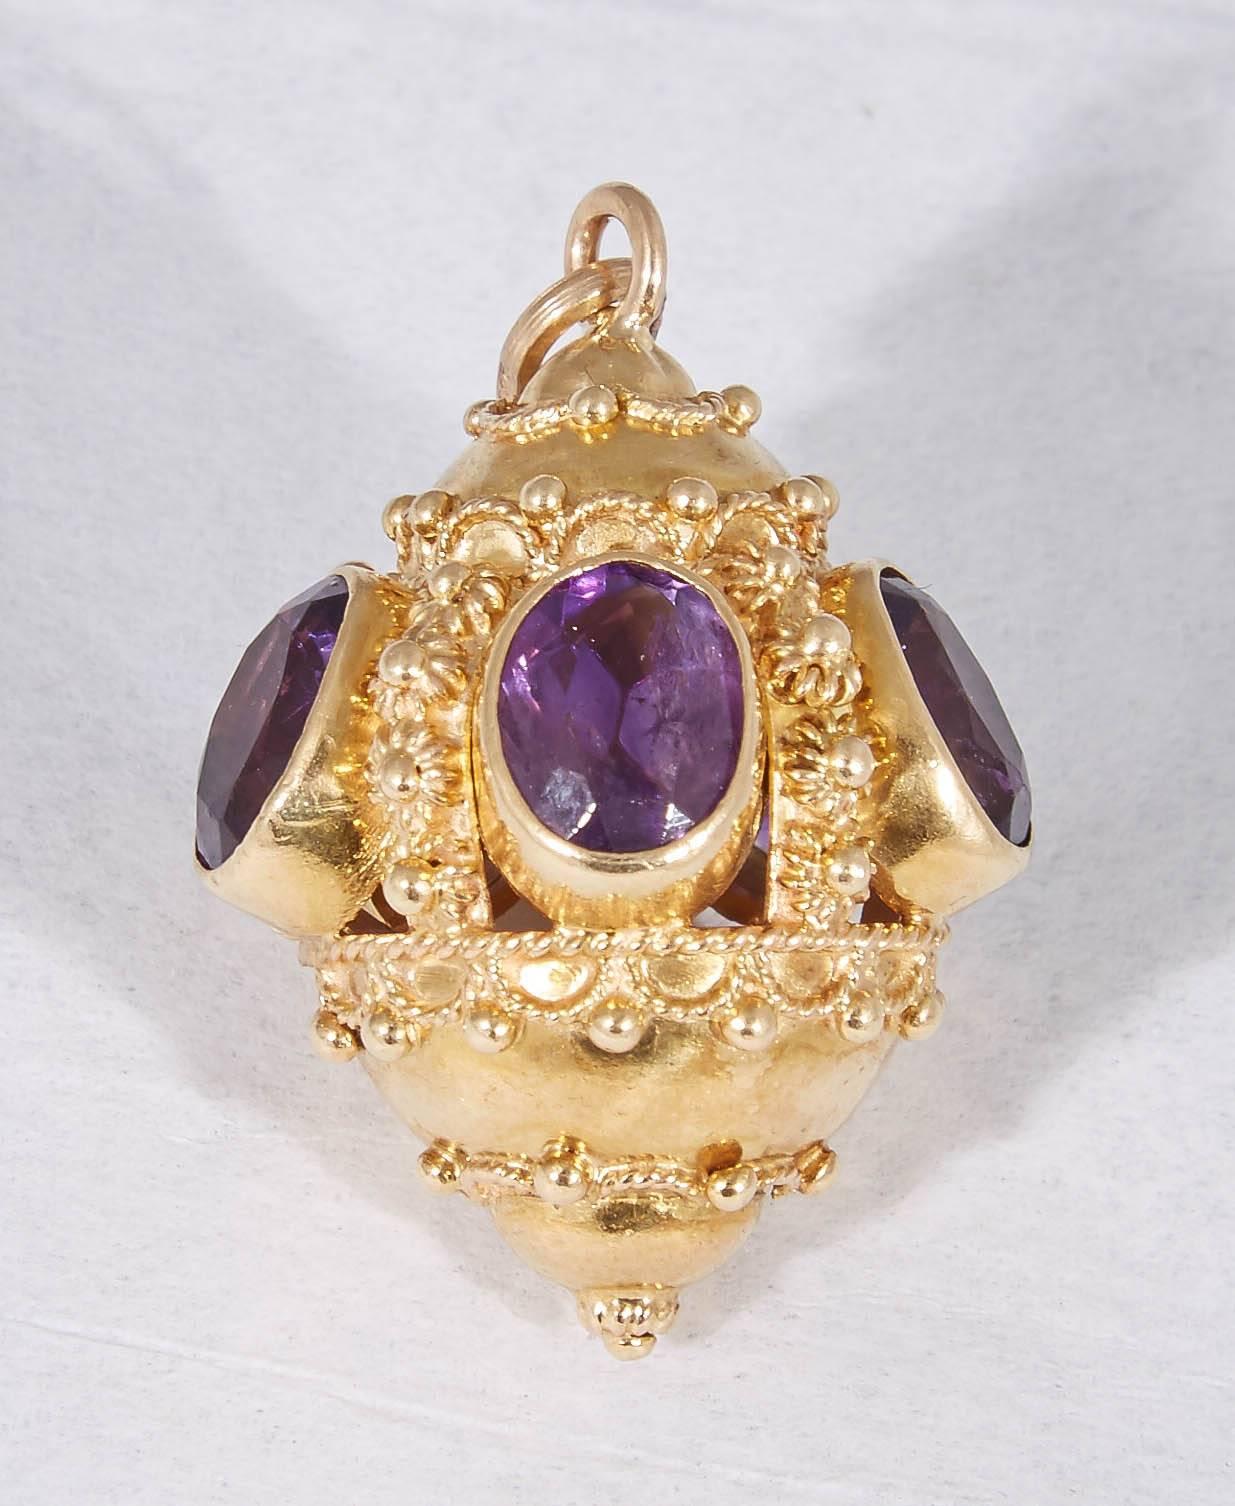 One 18kt Gold Crown Charm/pendant Designed With [5] Faceted Cut Amethyst Stones And Exhibiting Beautiful Textured Gold Workmanship In The Shape Of A Floral Pattern And Trim Design. Made In The 1950's In America.